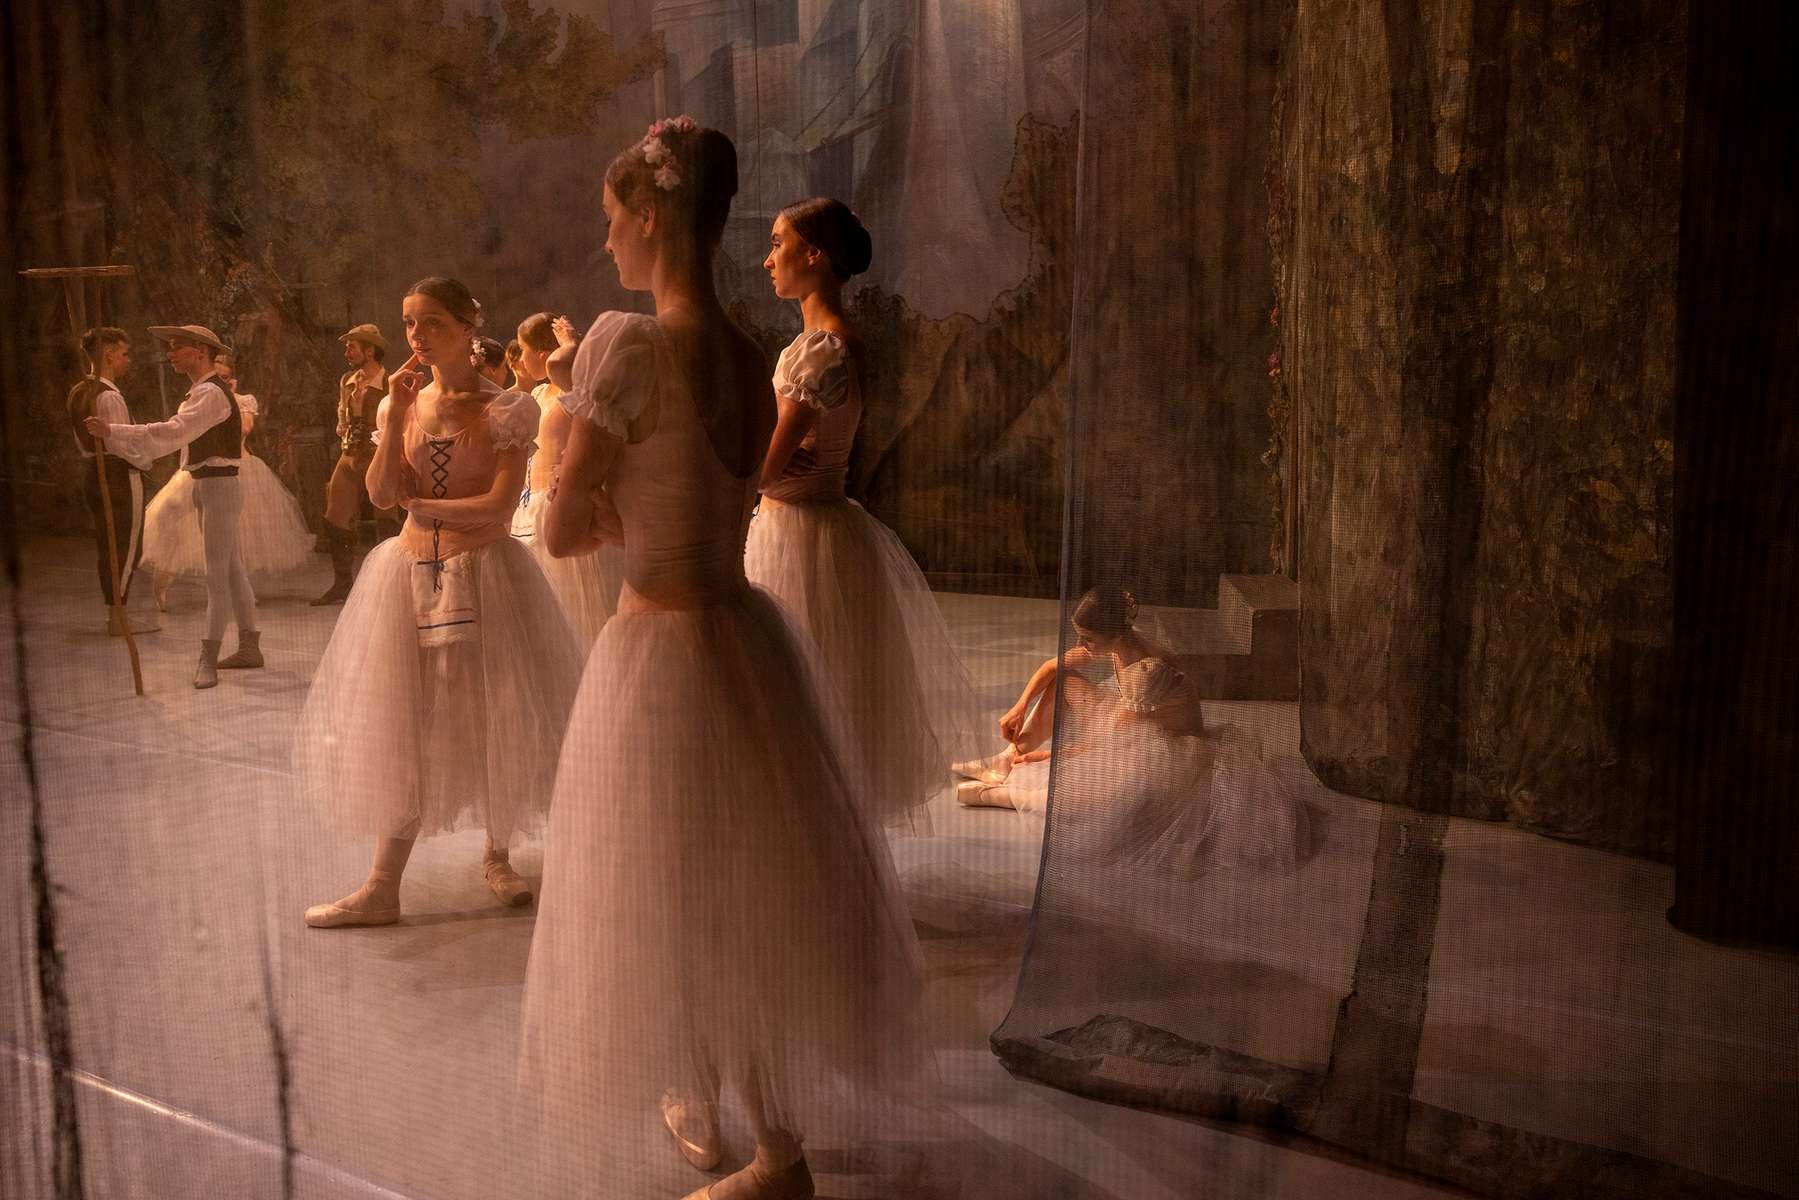 LVIV, UKRAINE - Ballet dancers are seen onstage before the ballet performance Giselle begins June 10, 2022 in Lviv, Ukraine. The Lviv National Opera house started performances last month for both ballet and opera.The bomb shelter can only hold 300 people so tickets are limited incase a siren goes off during the performance. (Photo by Paula Bronstein /Getty Images)